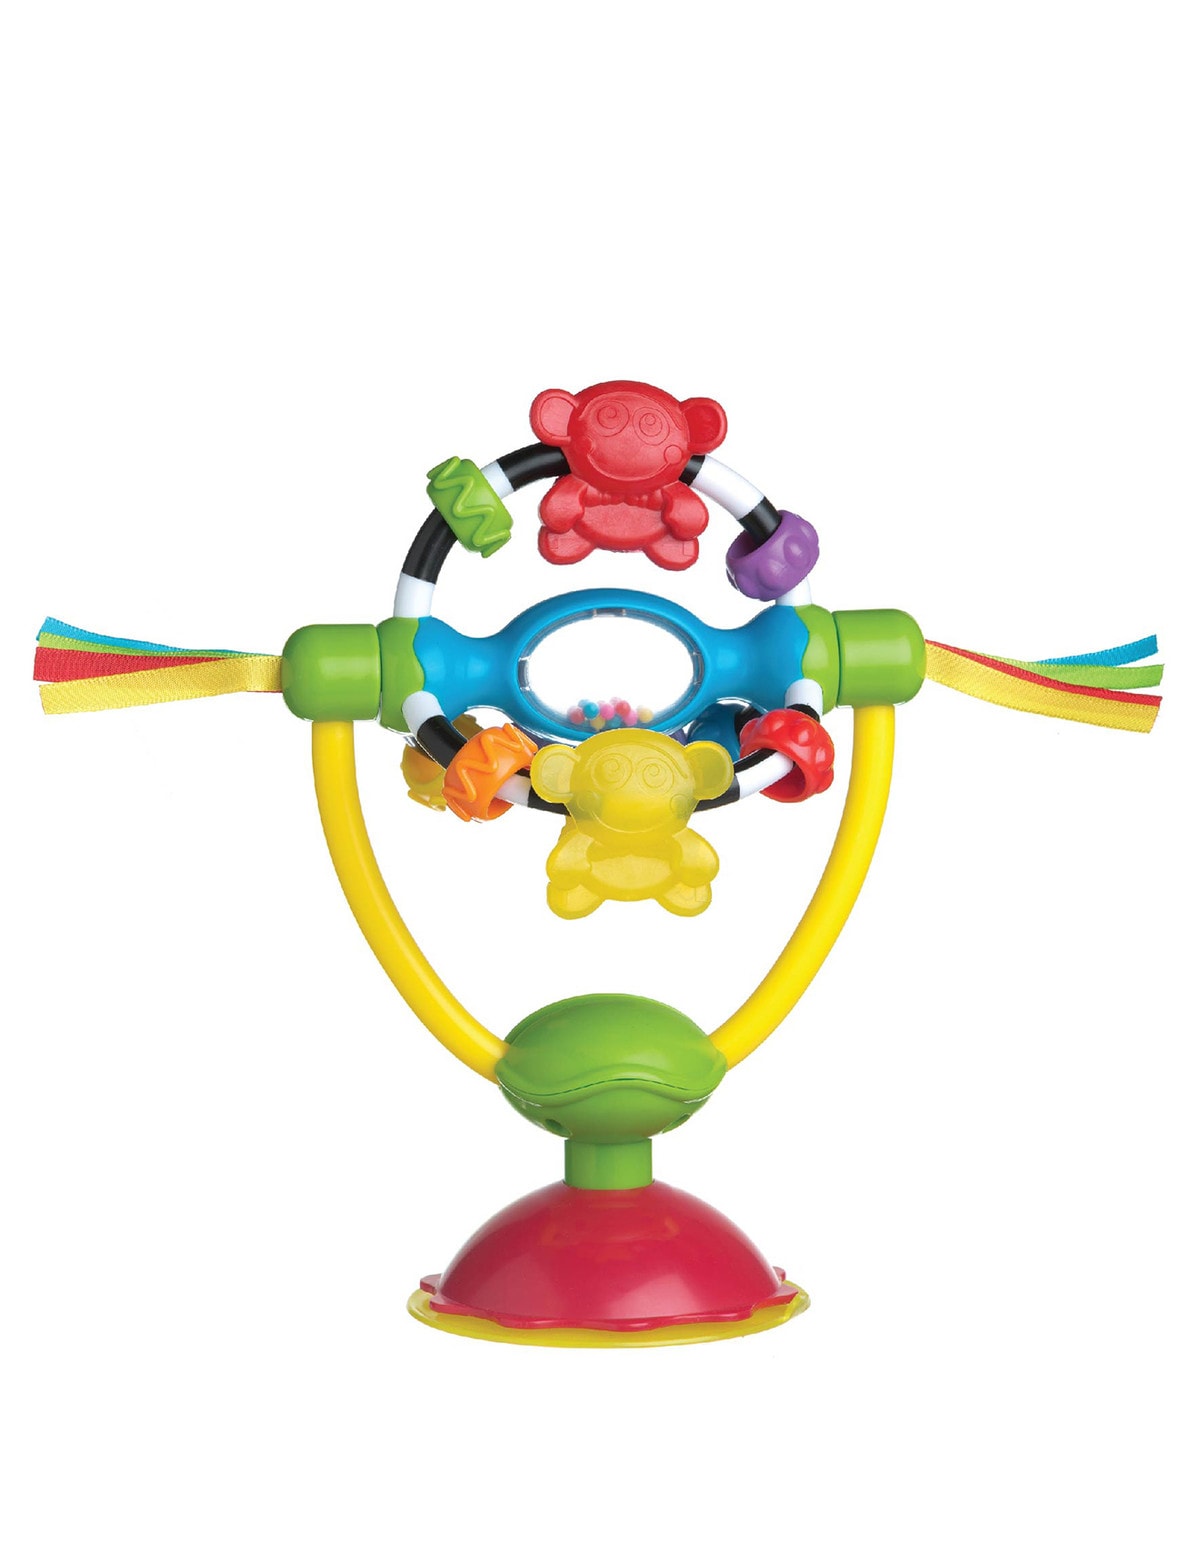 Playgro High Chair Spinning Toy Baby